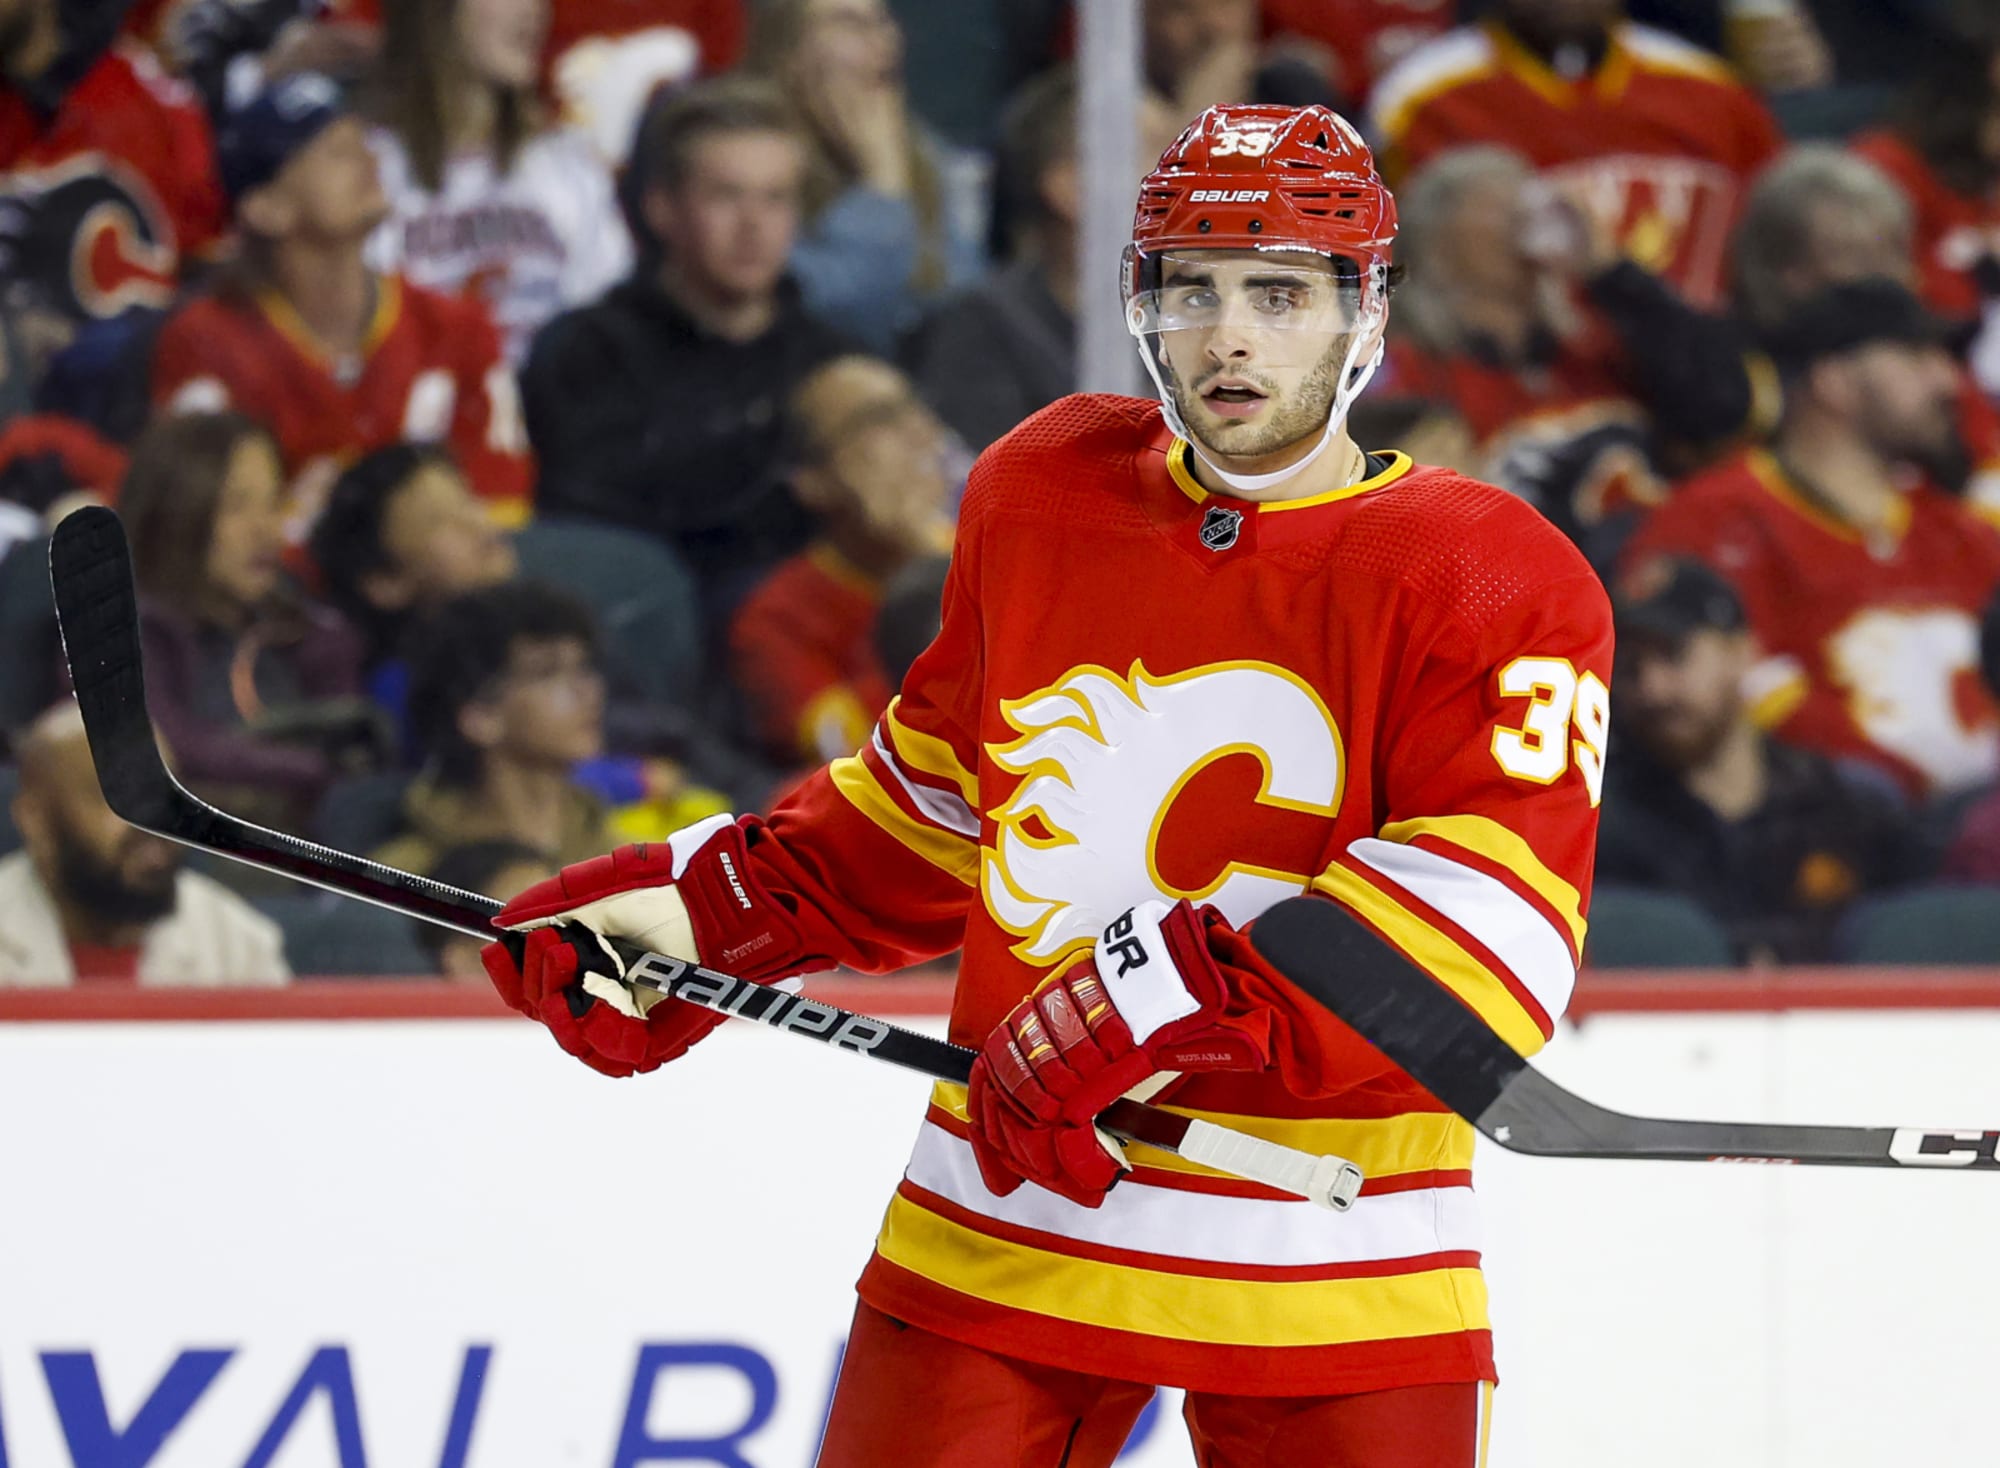 Why the Calgary Flames are Canada's team - The Hockey News